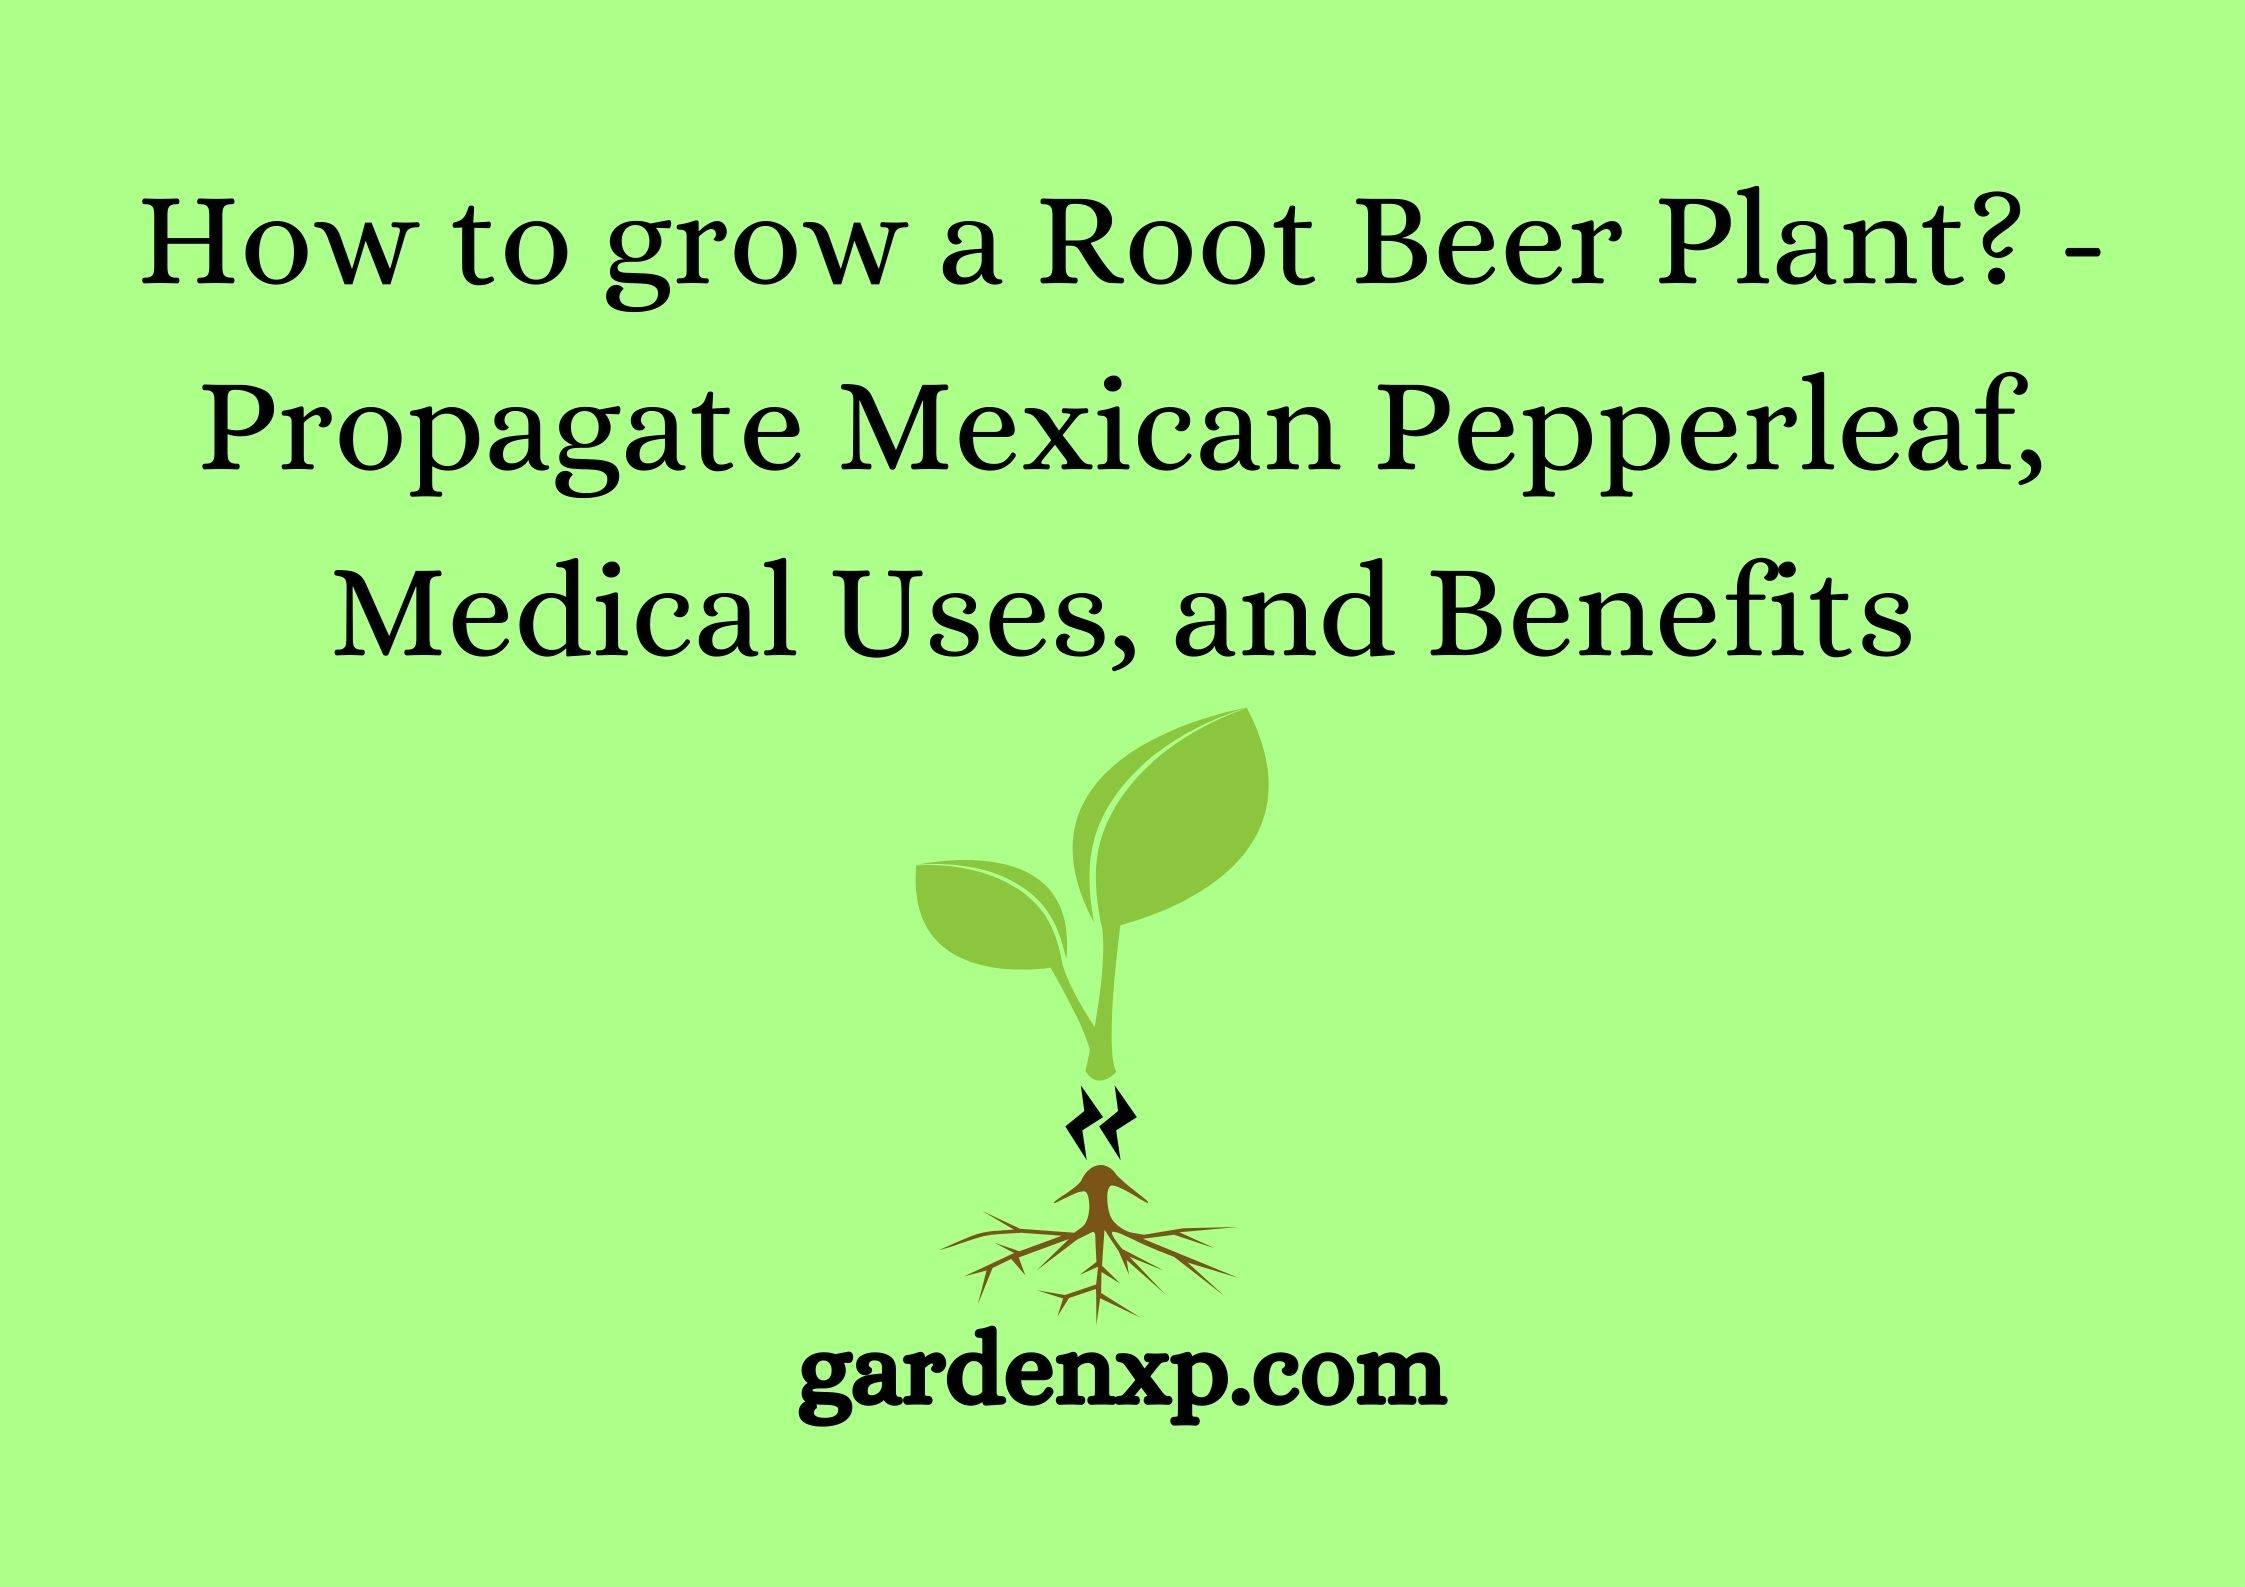 How to Grow Root Beer Plant? - Propagate Mexican Pepperleaf Medical Uses and Benefits